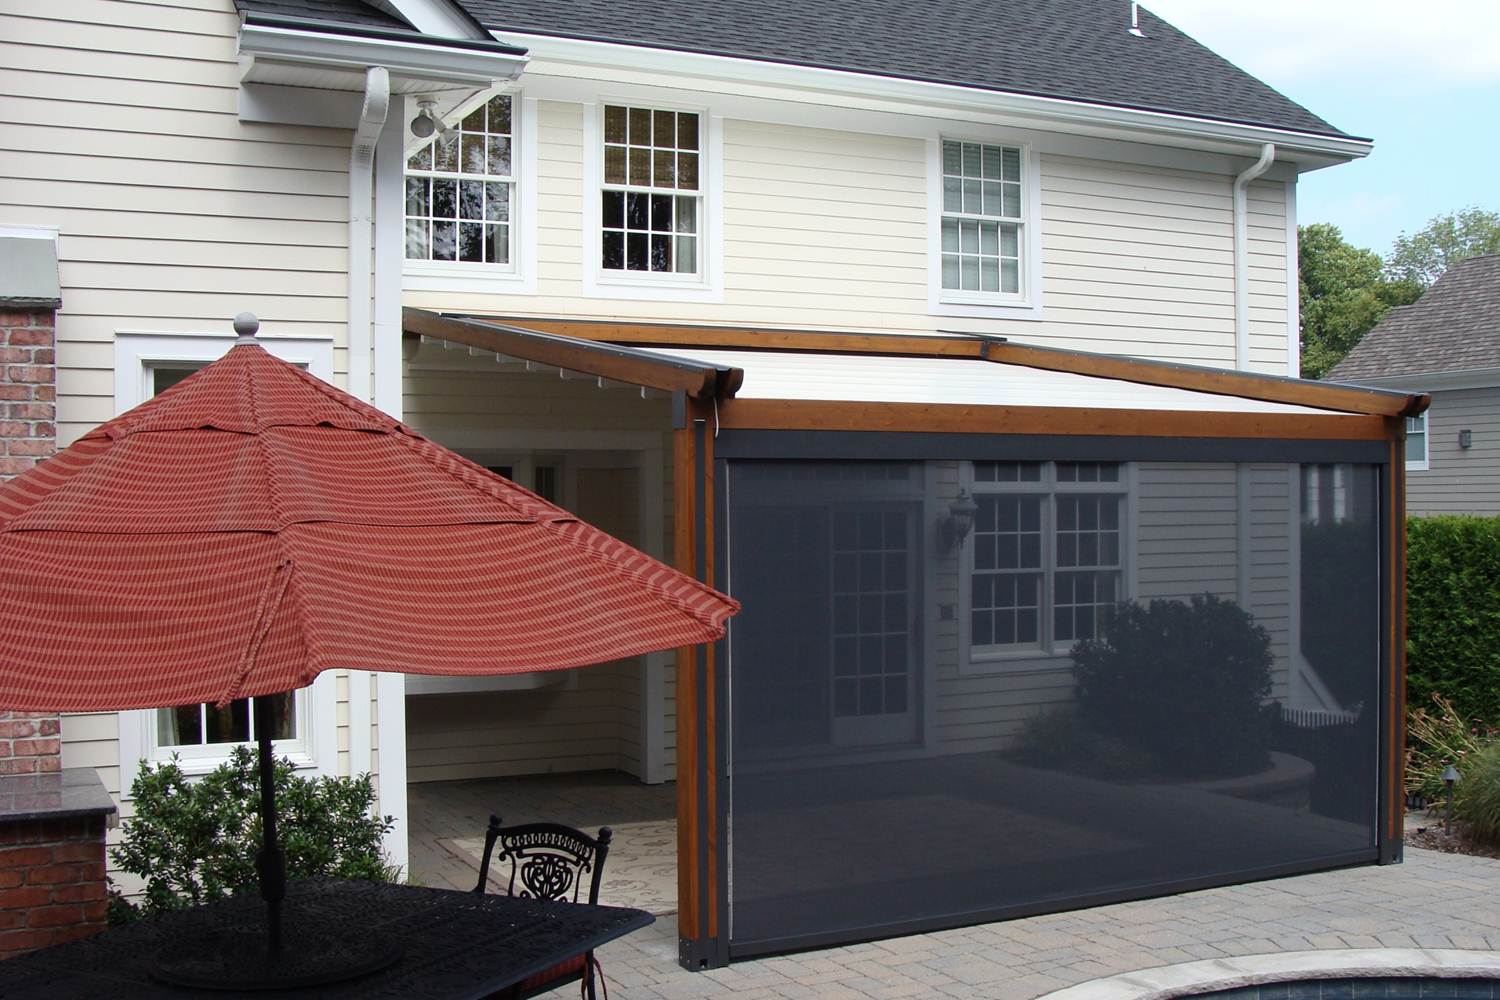 Retractable Awnings To Retract Or Not To Retract That Is The Question Window Works